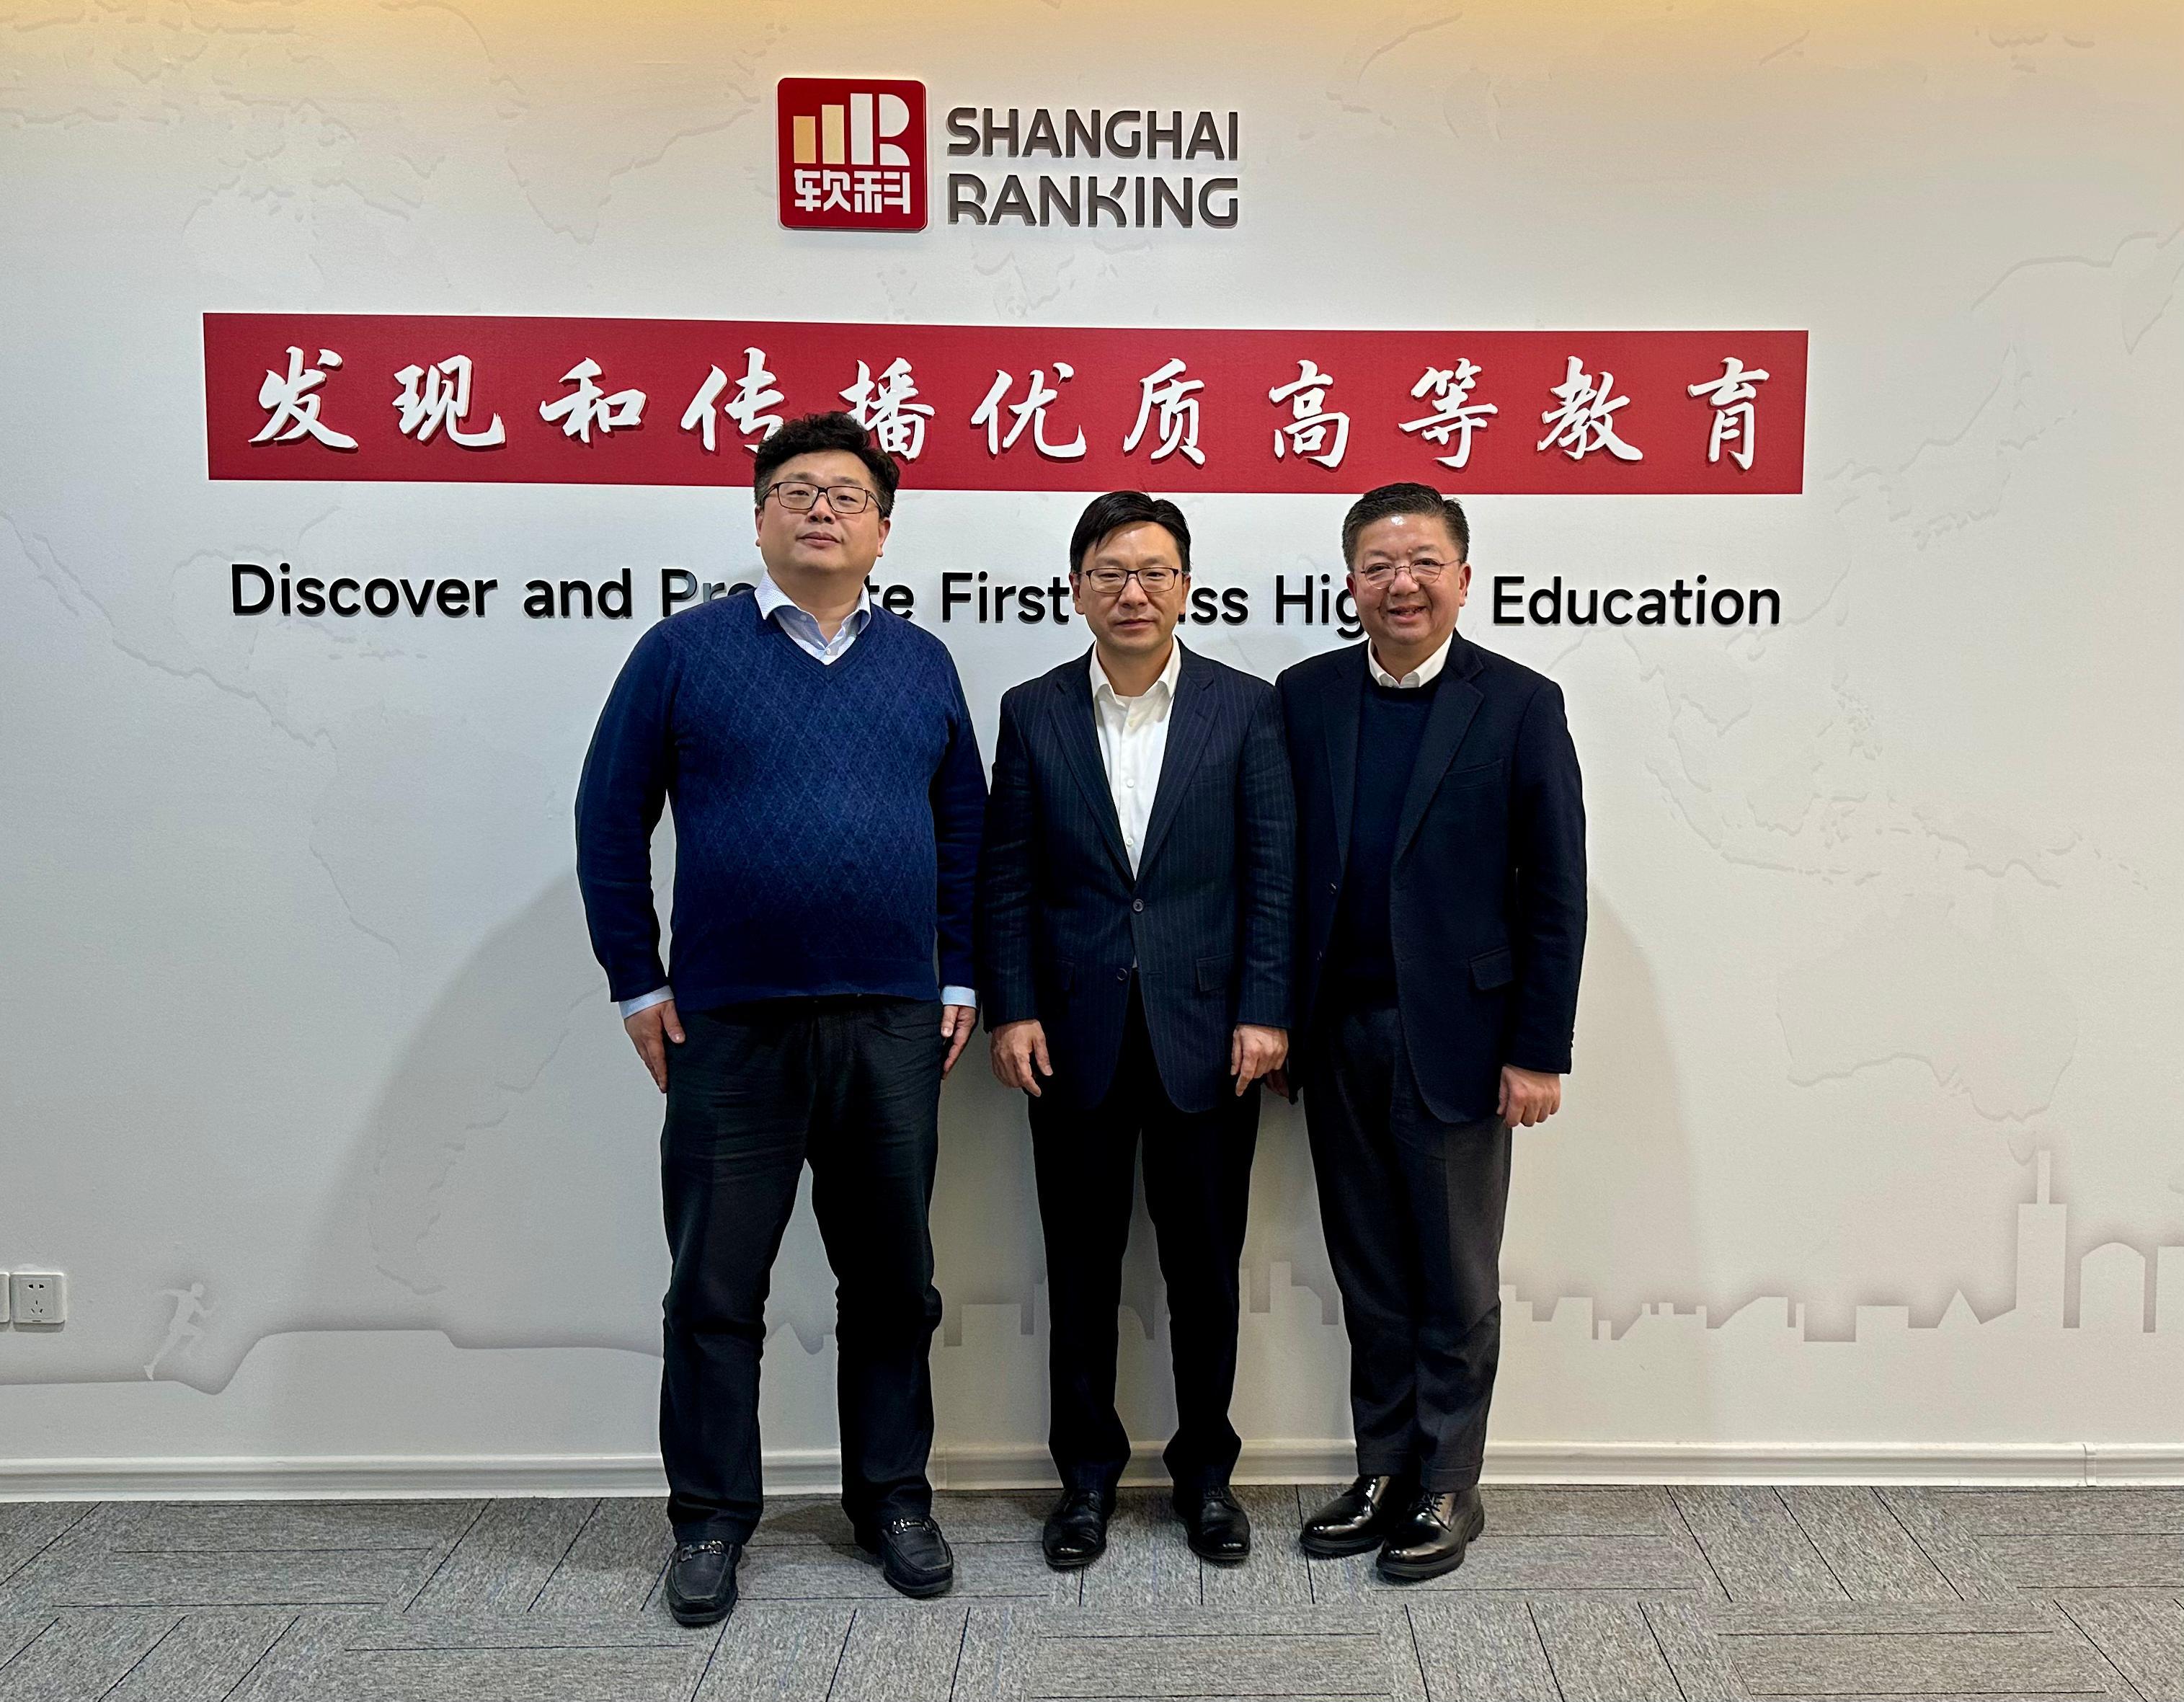 The Secretary for Labour and Welfare, Mr Chris Sun, today (January 12) started his visit to Shanghai. The Director of Hong Kong Talent Engage, Mr Anthony Lau, also joined the visit. Photo shows Mr Sun (centre), accompanied by Mr Lau (right), and the founder of ShanghaiRanking Consultancy, Dr Cheng Ying (left), in his visit this afternoon to learn more about the ranking agency's work for the Shanghai Jiao Tong University Academic Ranking of World Universities.